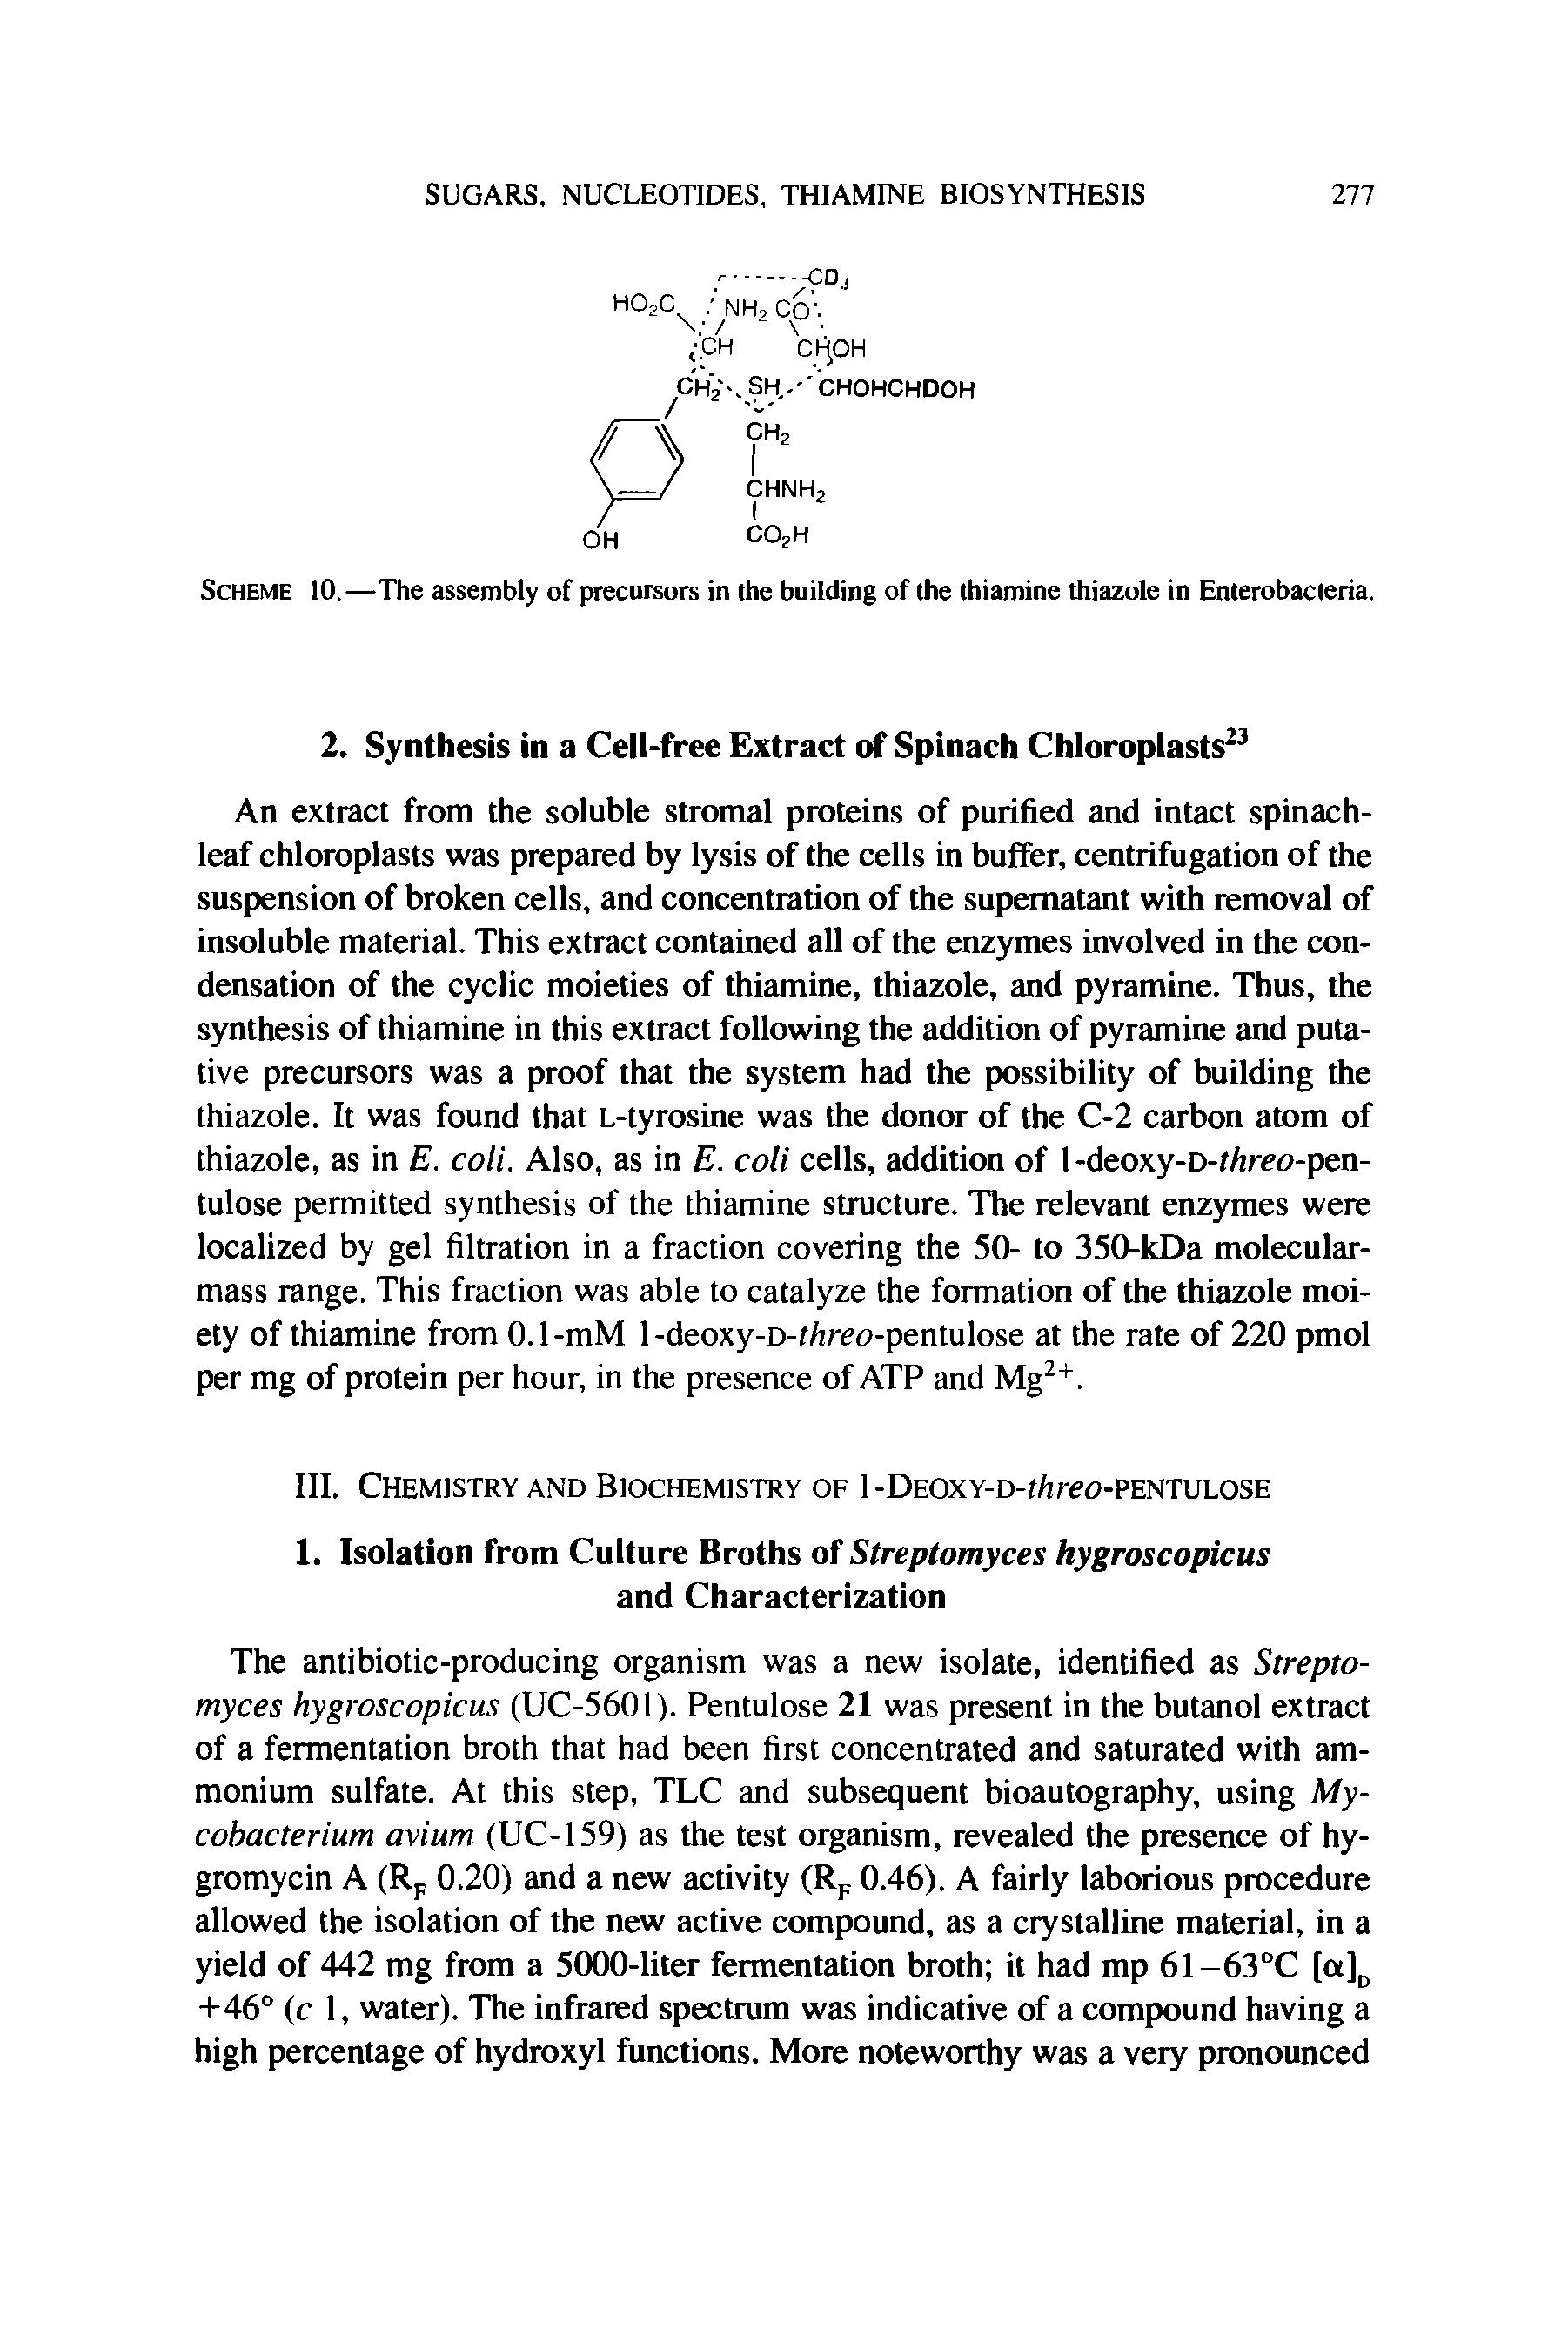 Scheme 10.—The assembly of precursors in the building of the thiamine thiazole in Enterobacteria.